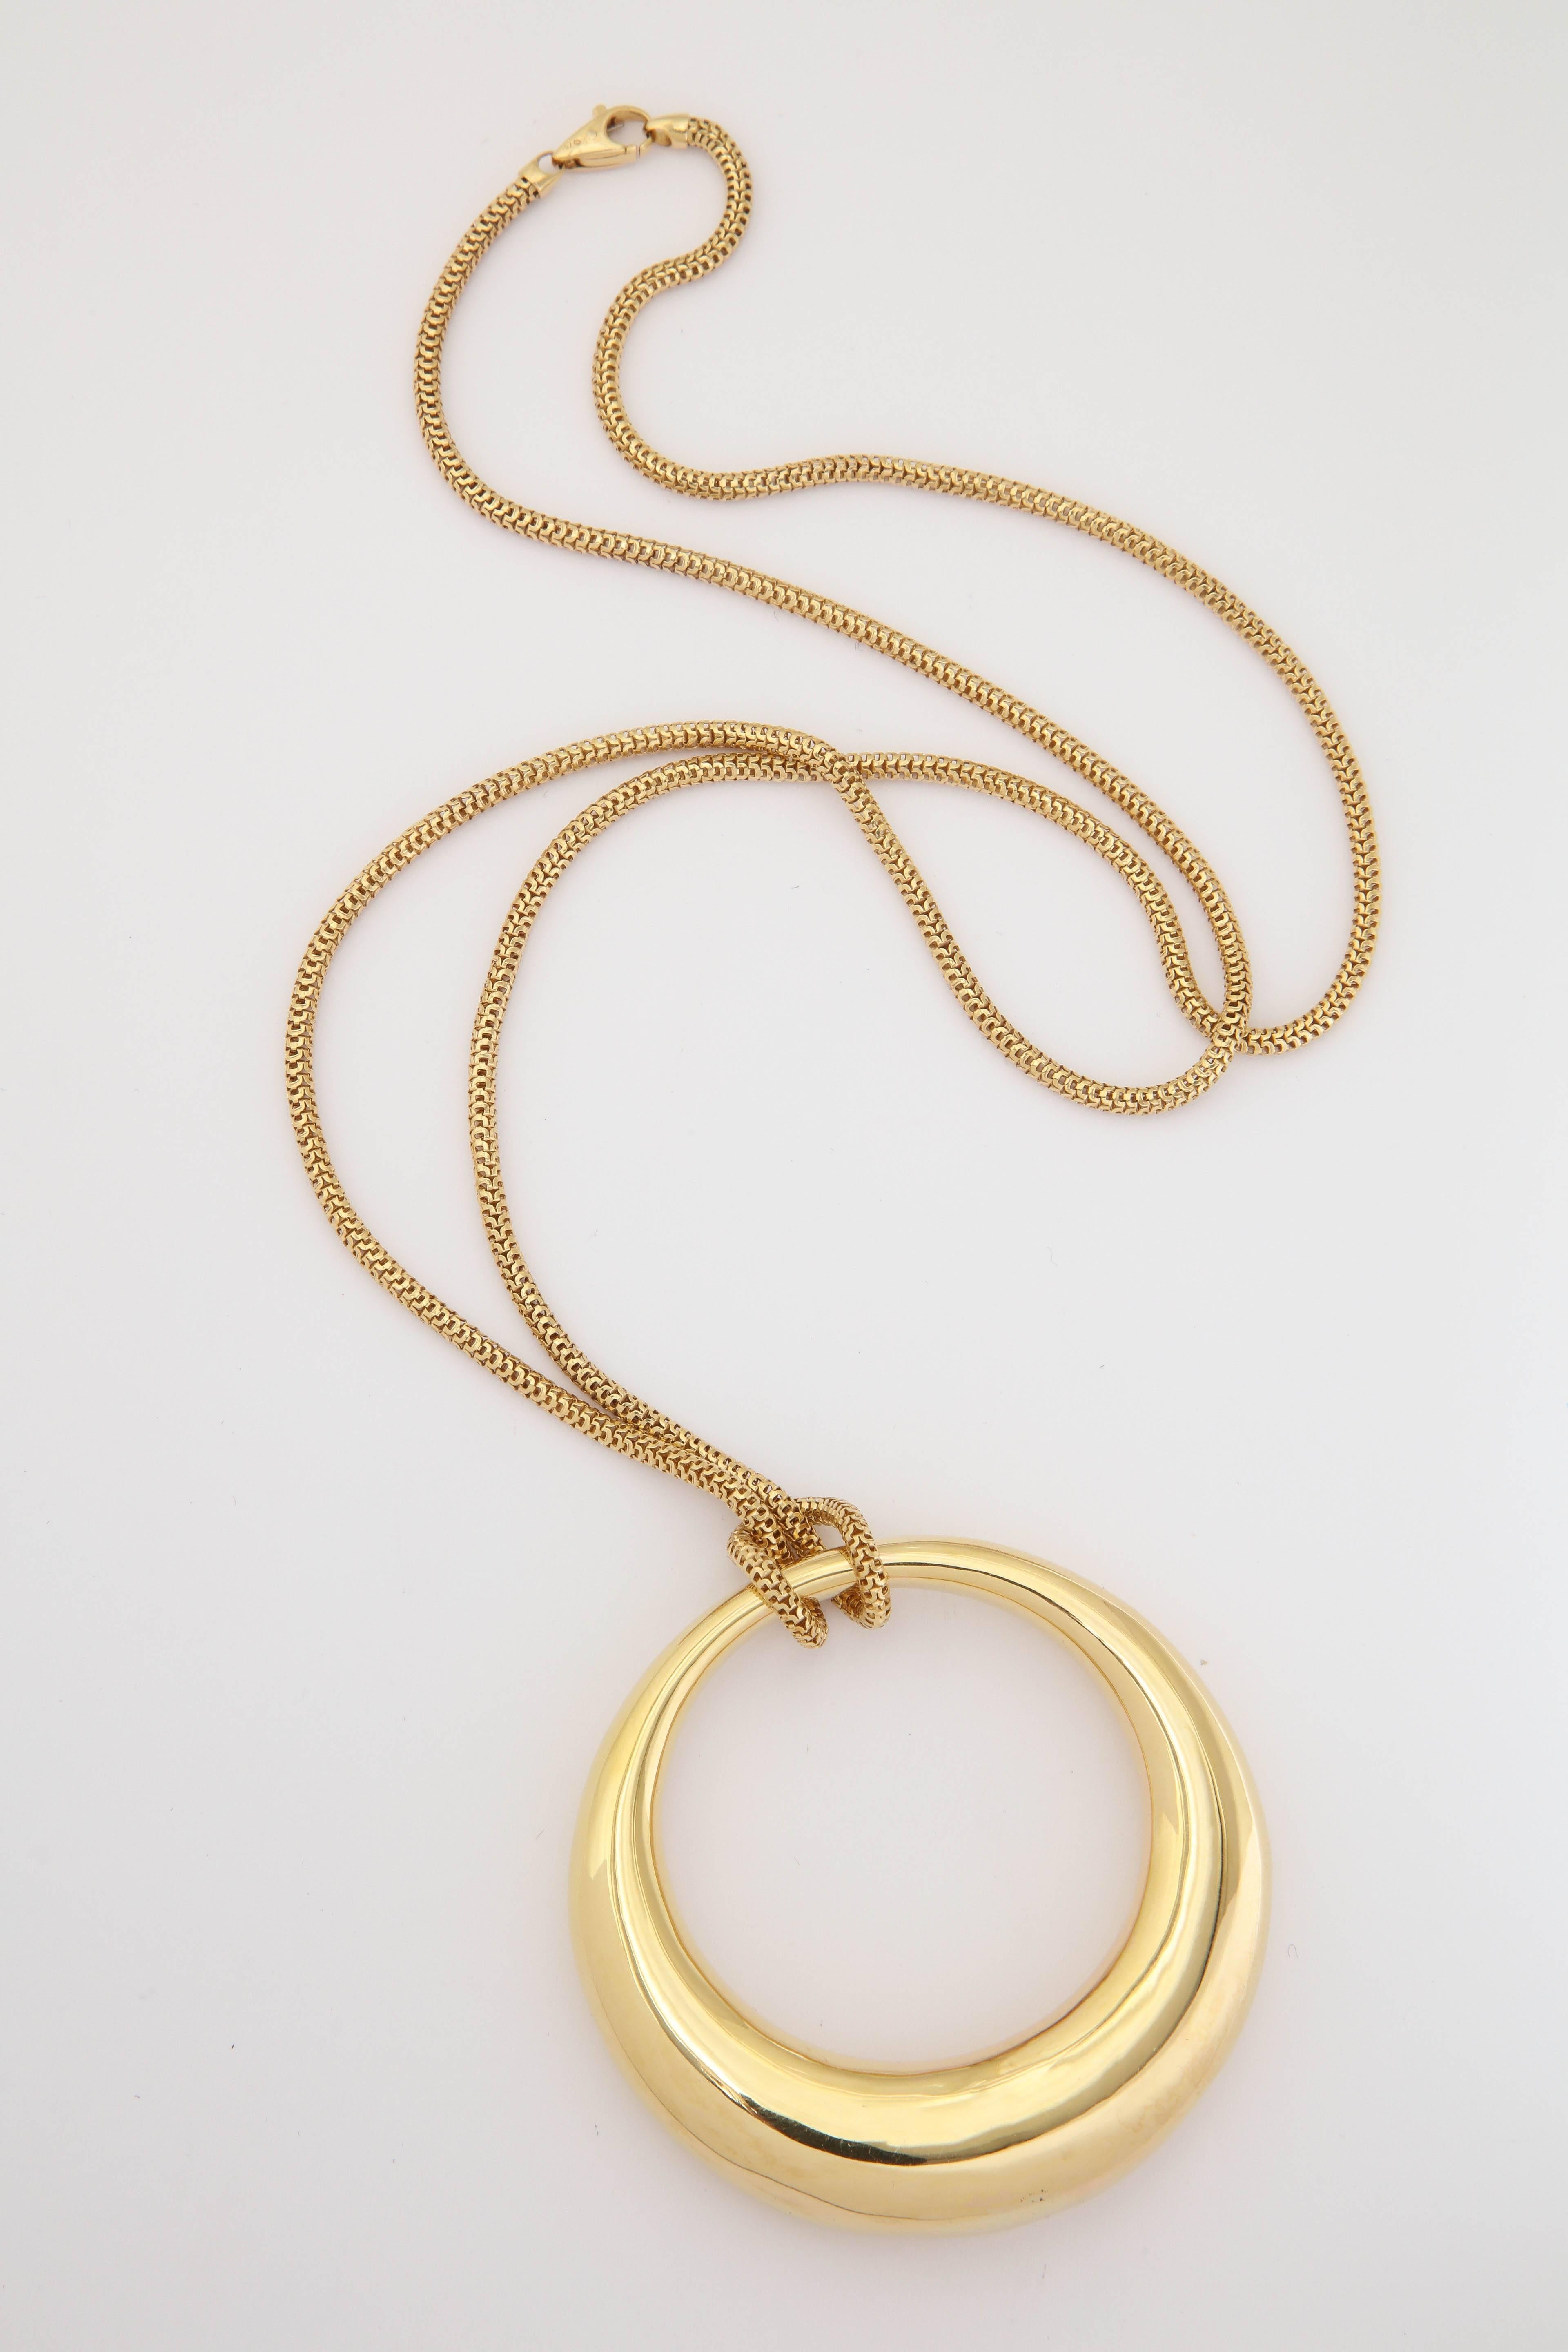 One 18kt Gold Oblong Moon Shaped Circular Three Dimensional Circle Loop Pendant Created In 18kt High Polish Gold Attached And Wrapped By An 18kt Gold Reptile Box Link Chain. Made In The 1980's In Italy.May Be Worn Doubled For A Choker Style look.